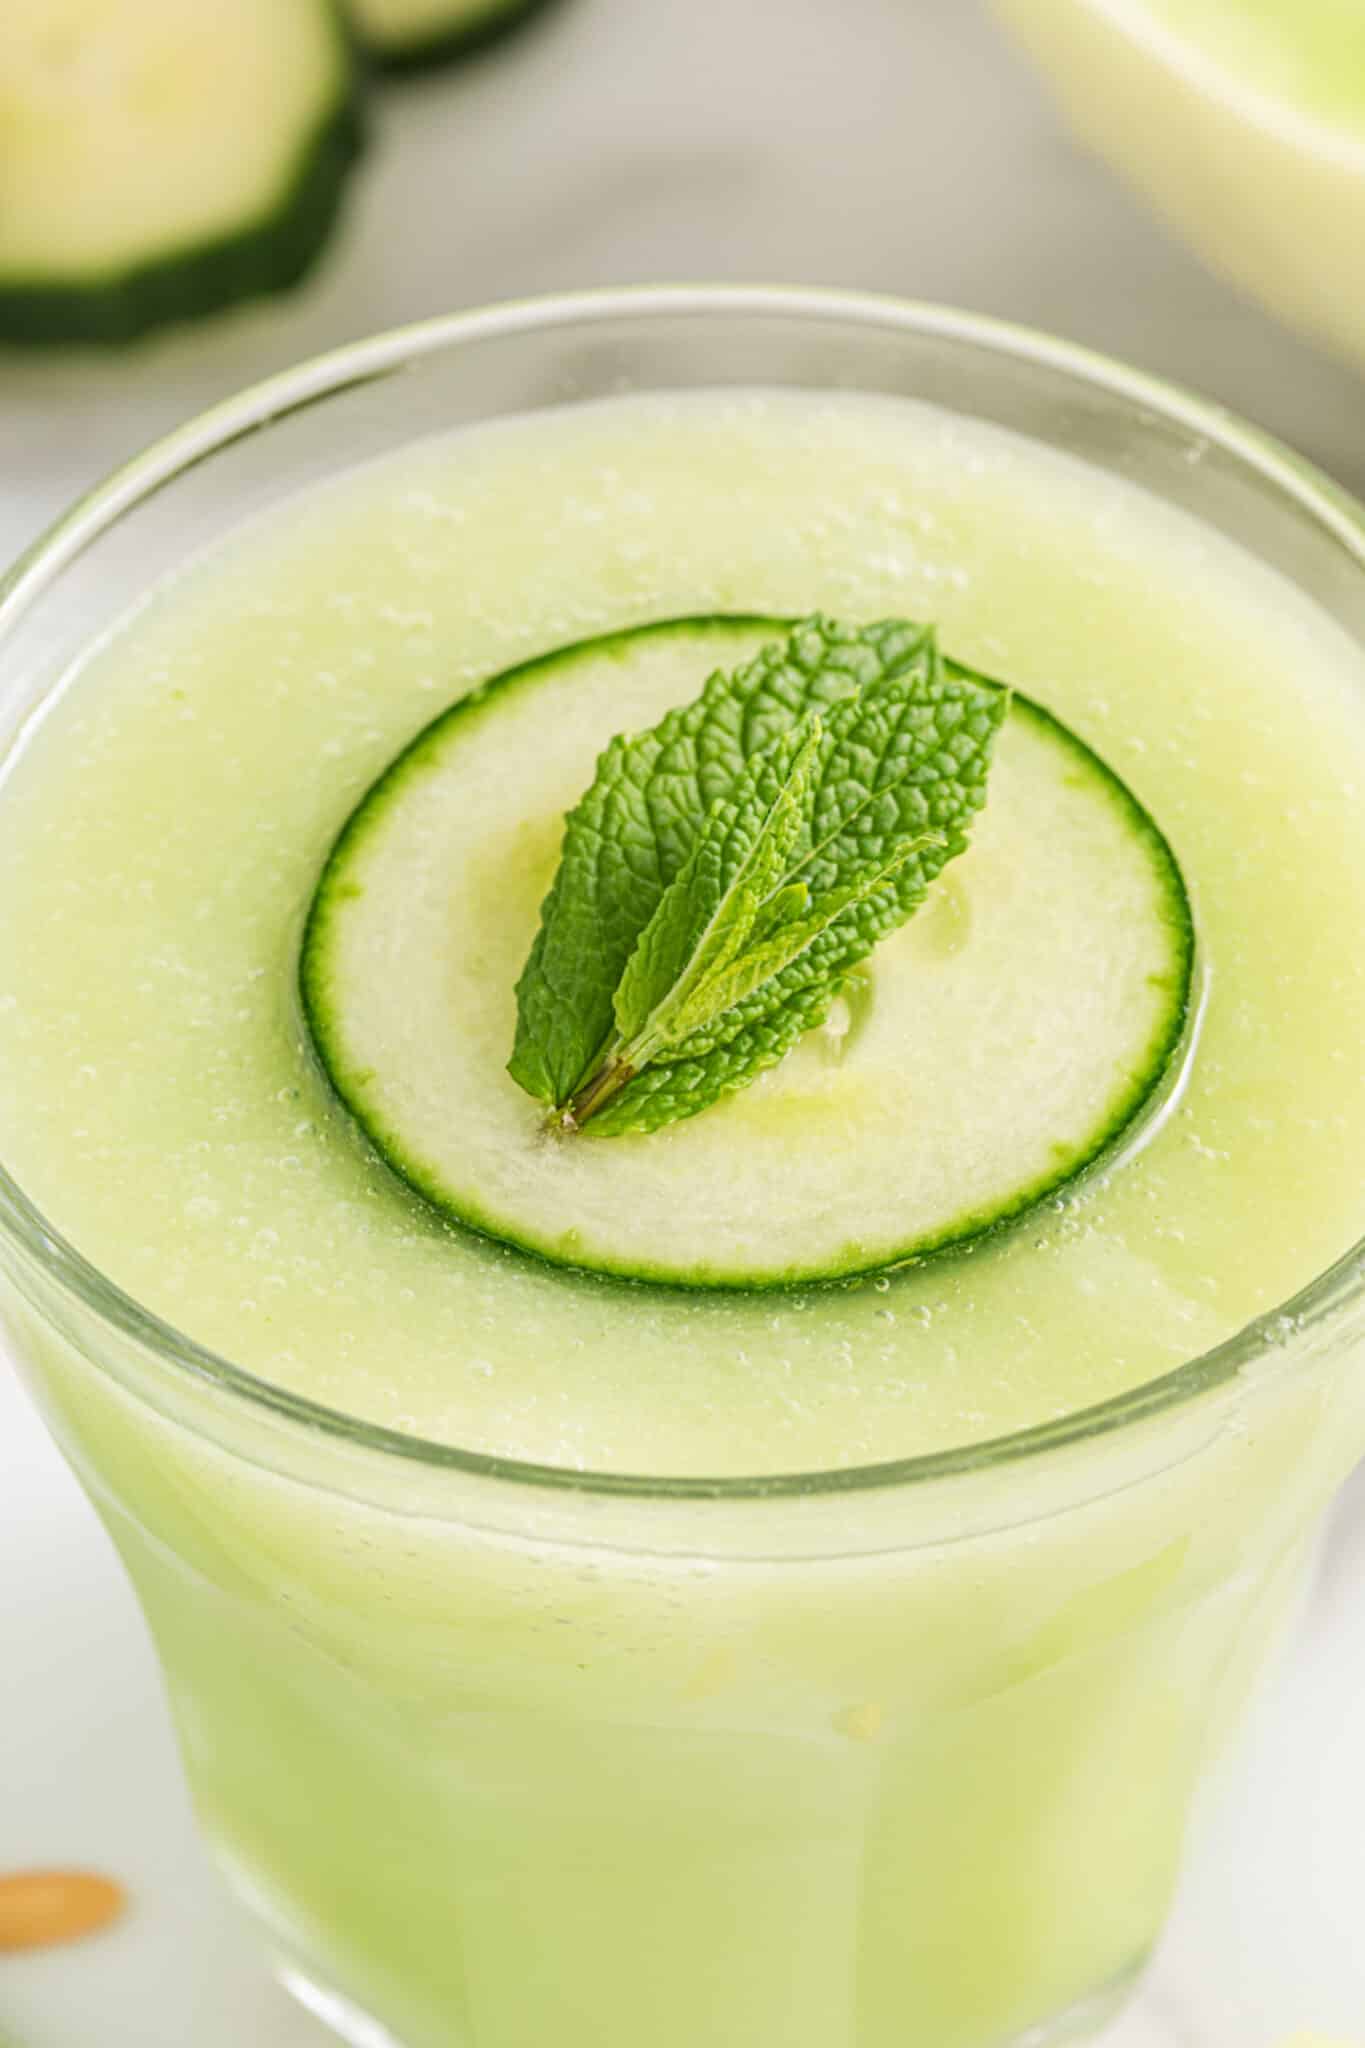 Closeup of a cucumber slice and mint leaf floating on a glass of Honeydew Smoothie.